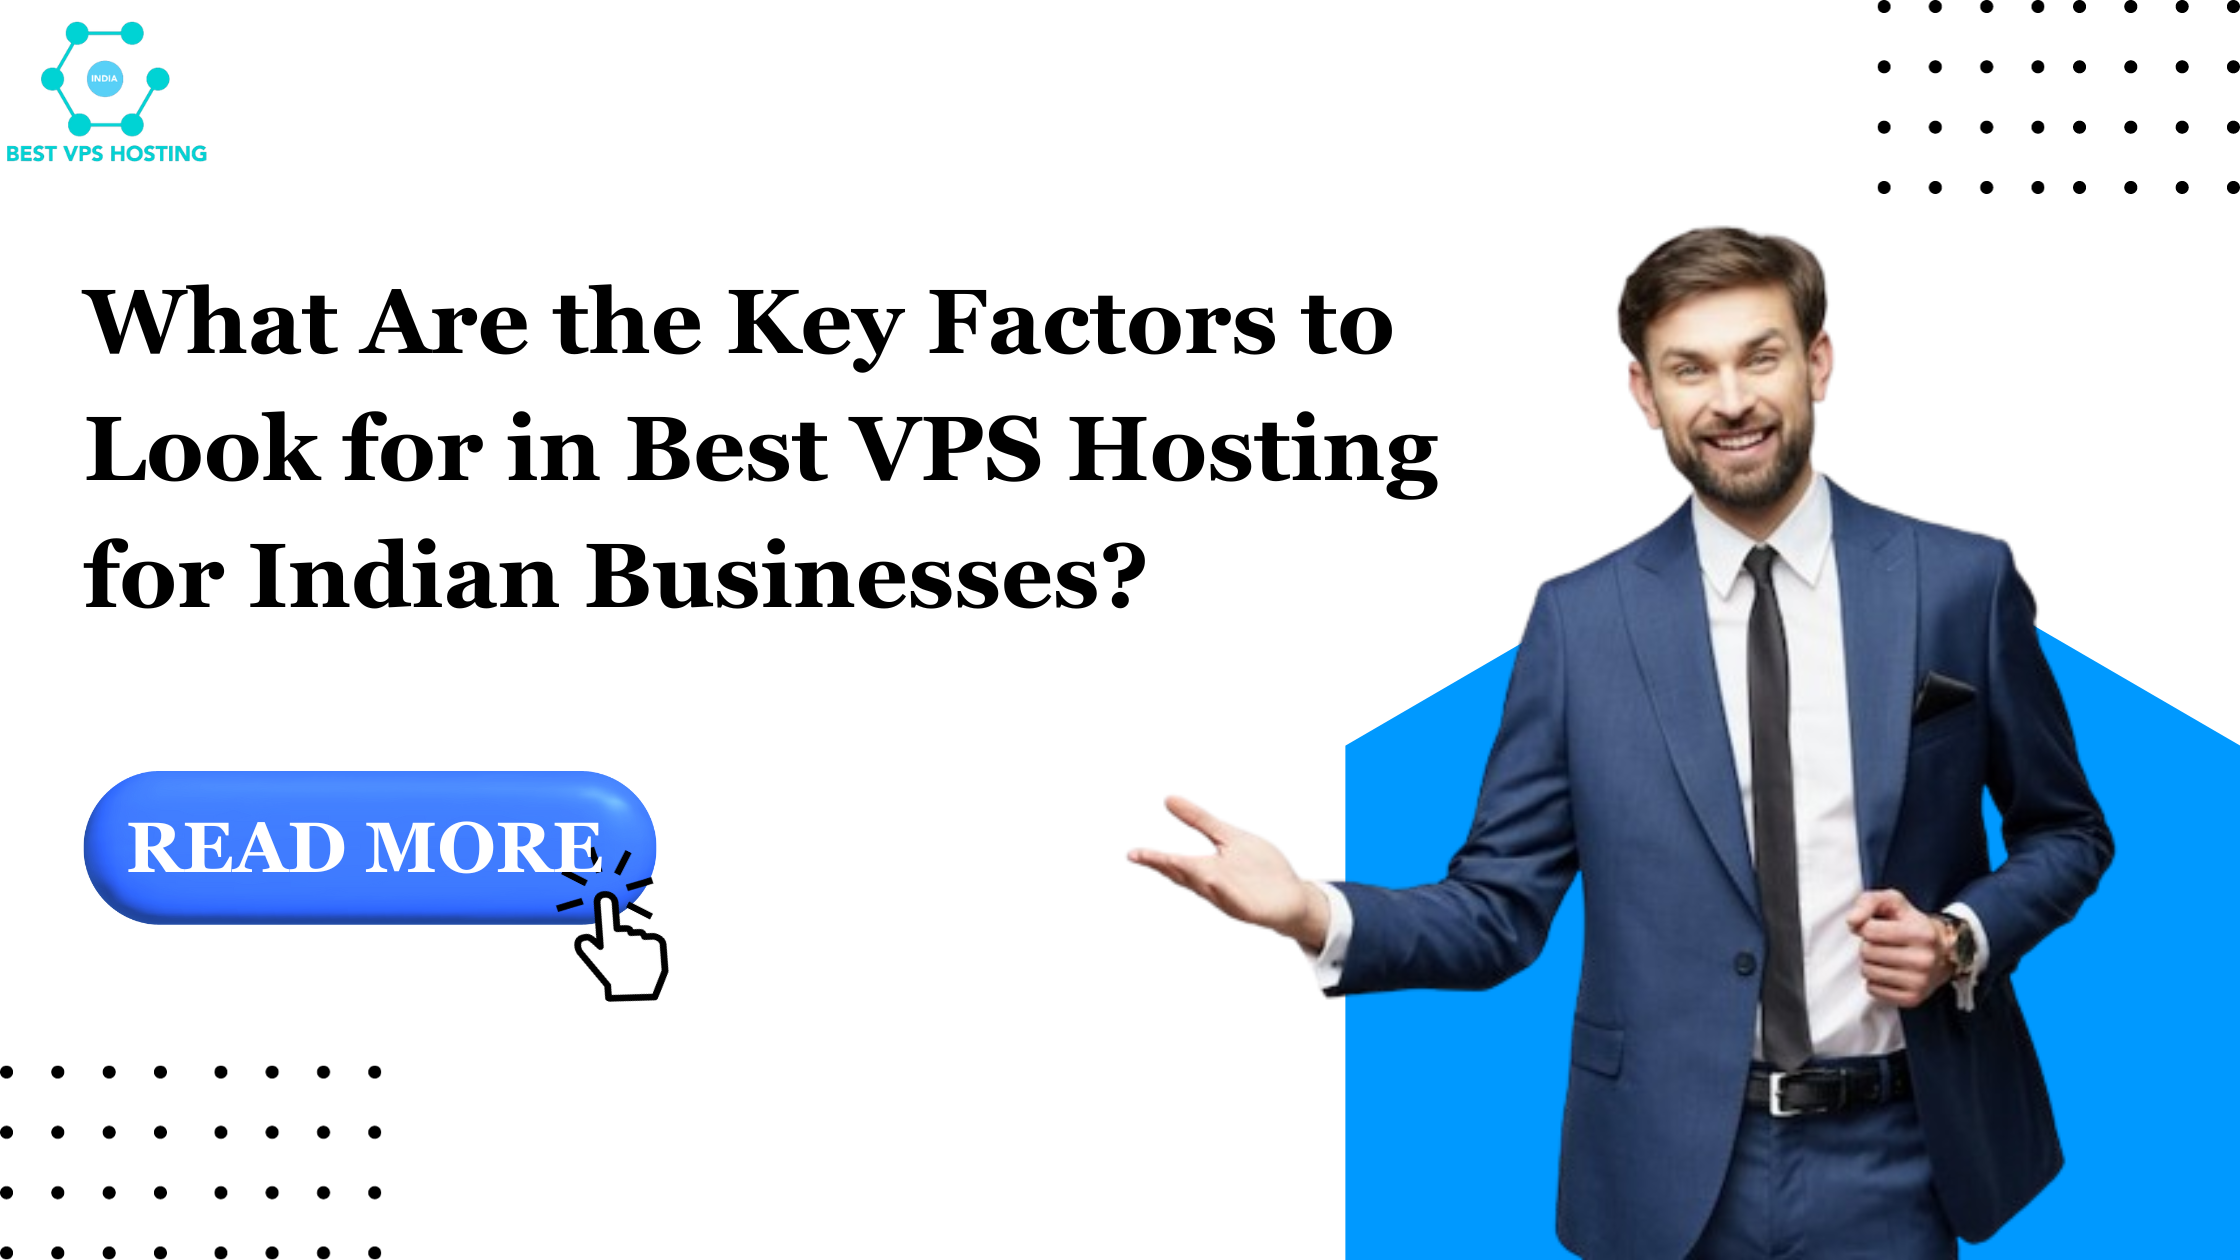 What Are the Key Factors to Look for in Best VPS Hosting for Indian Businesses